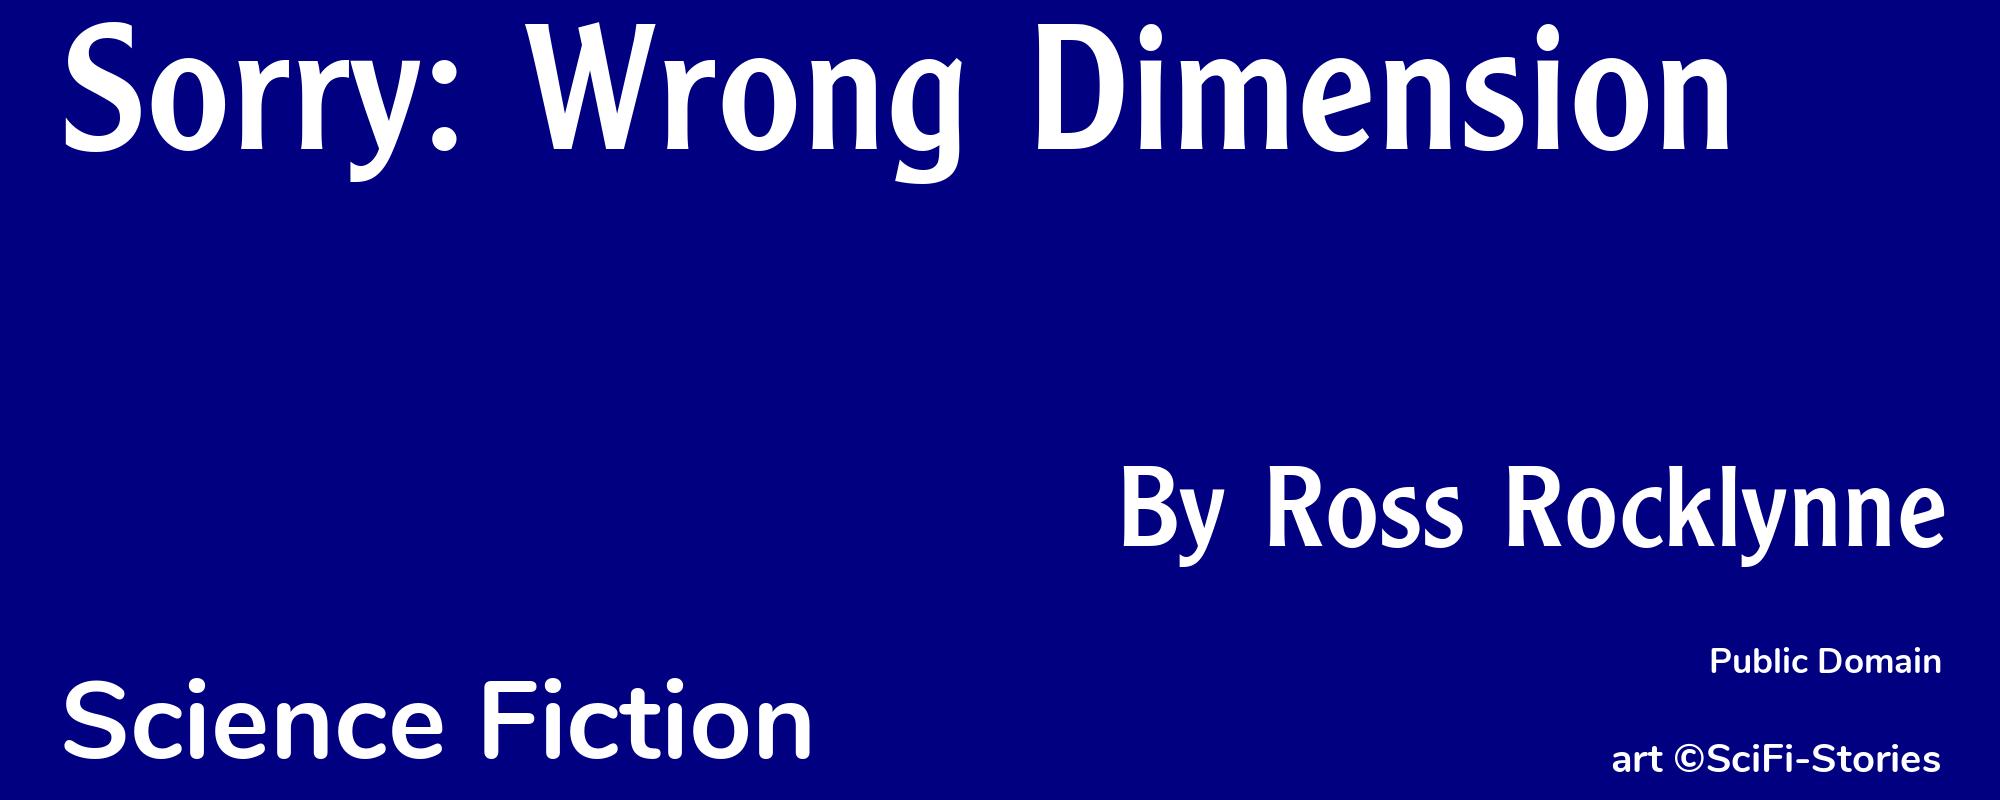 Sorry: Wrong Dimension - Cover